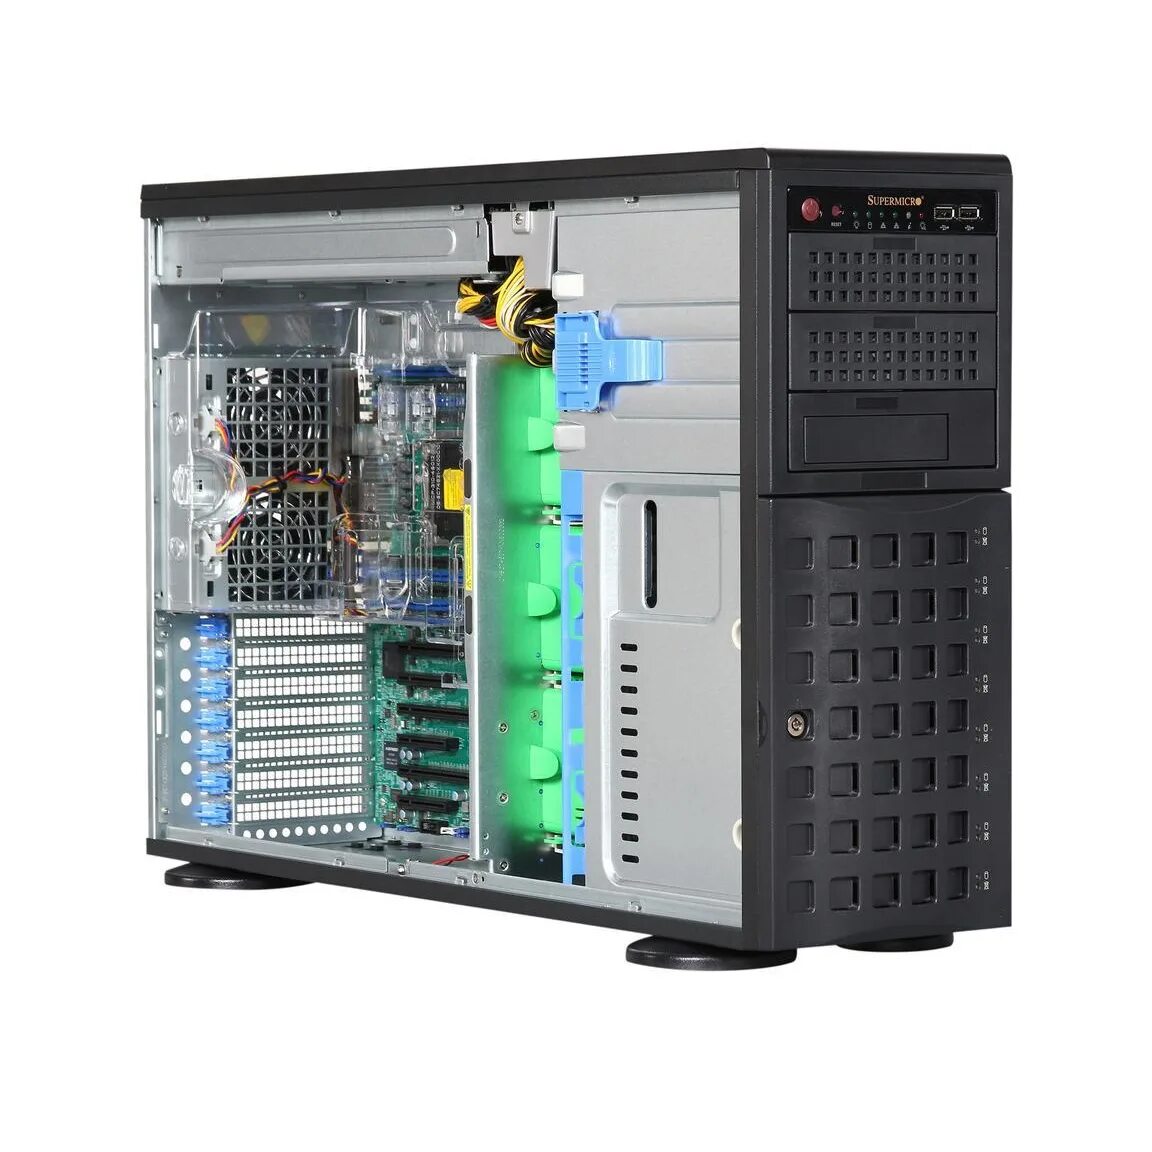 Supermicro sys-7048r-tr. 4u Supermicro sys-740a-t. Supermicro sys-7048r-tr (287612). Sys-7048a-t.